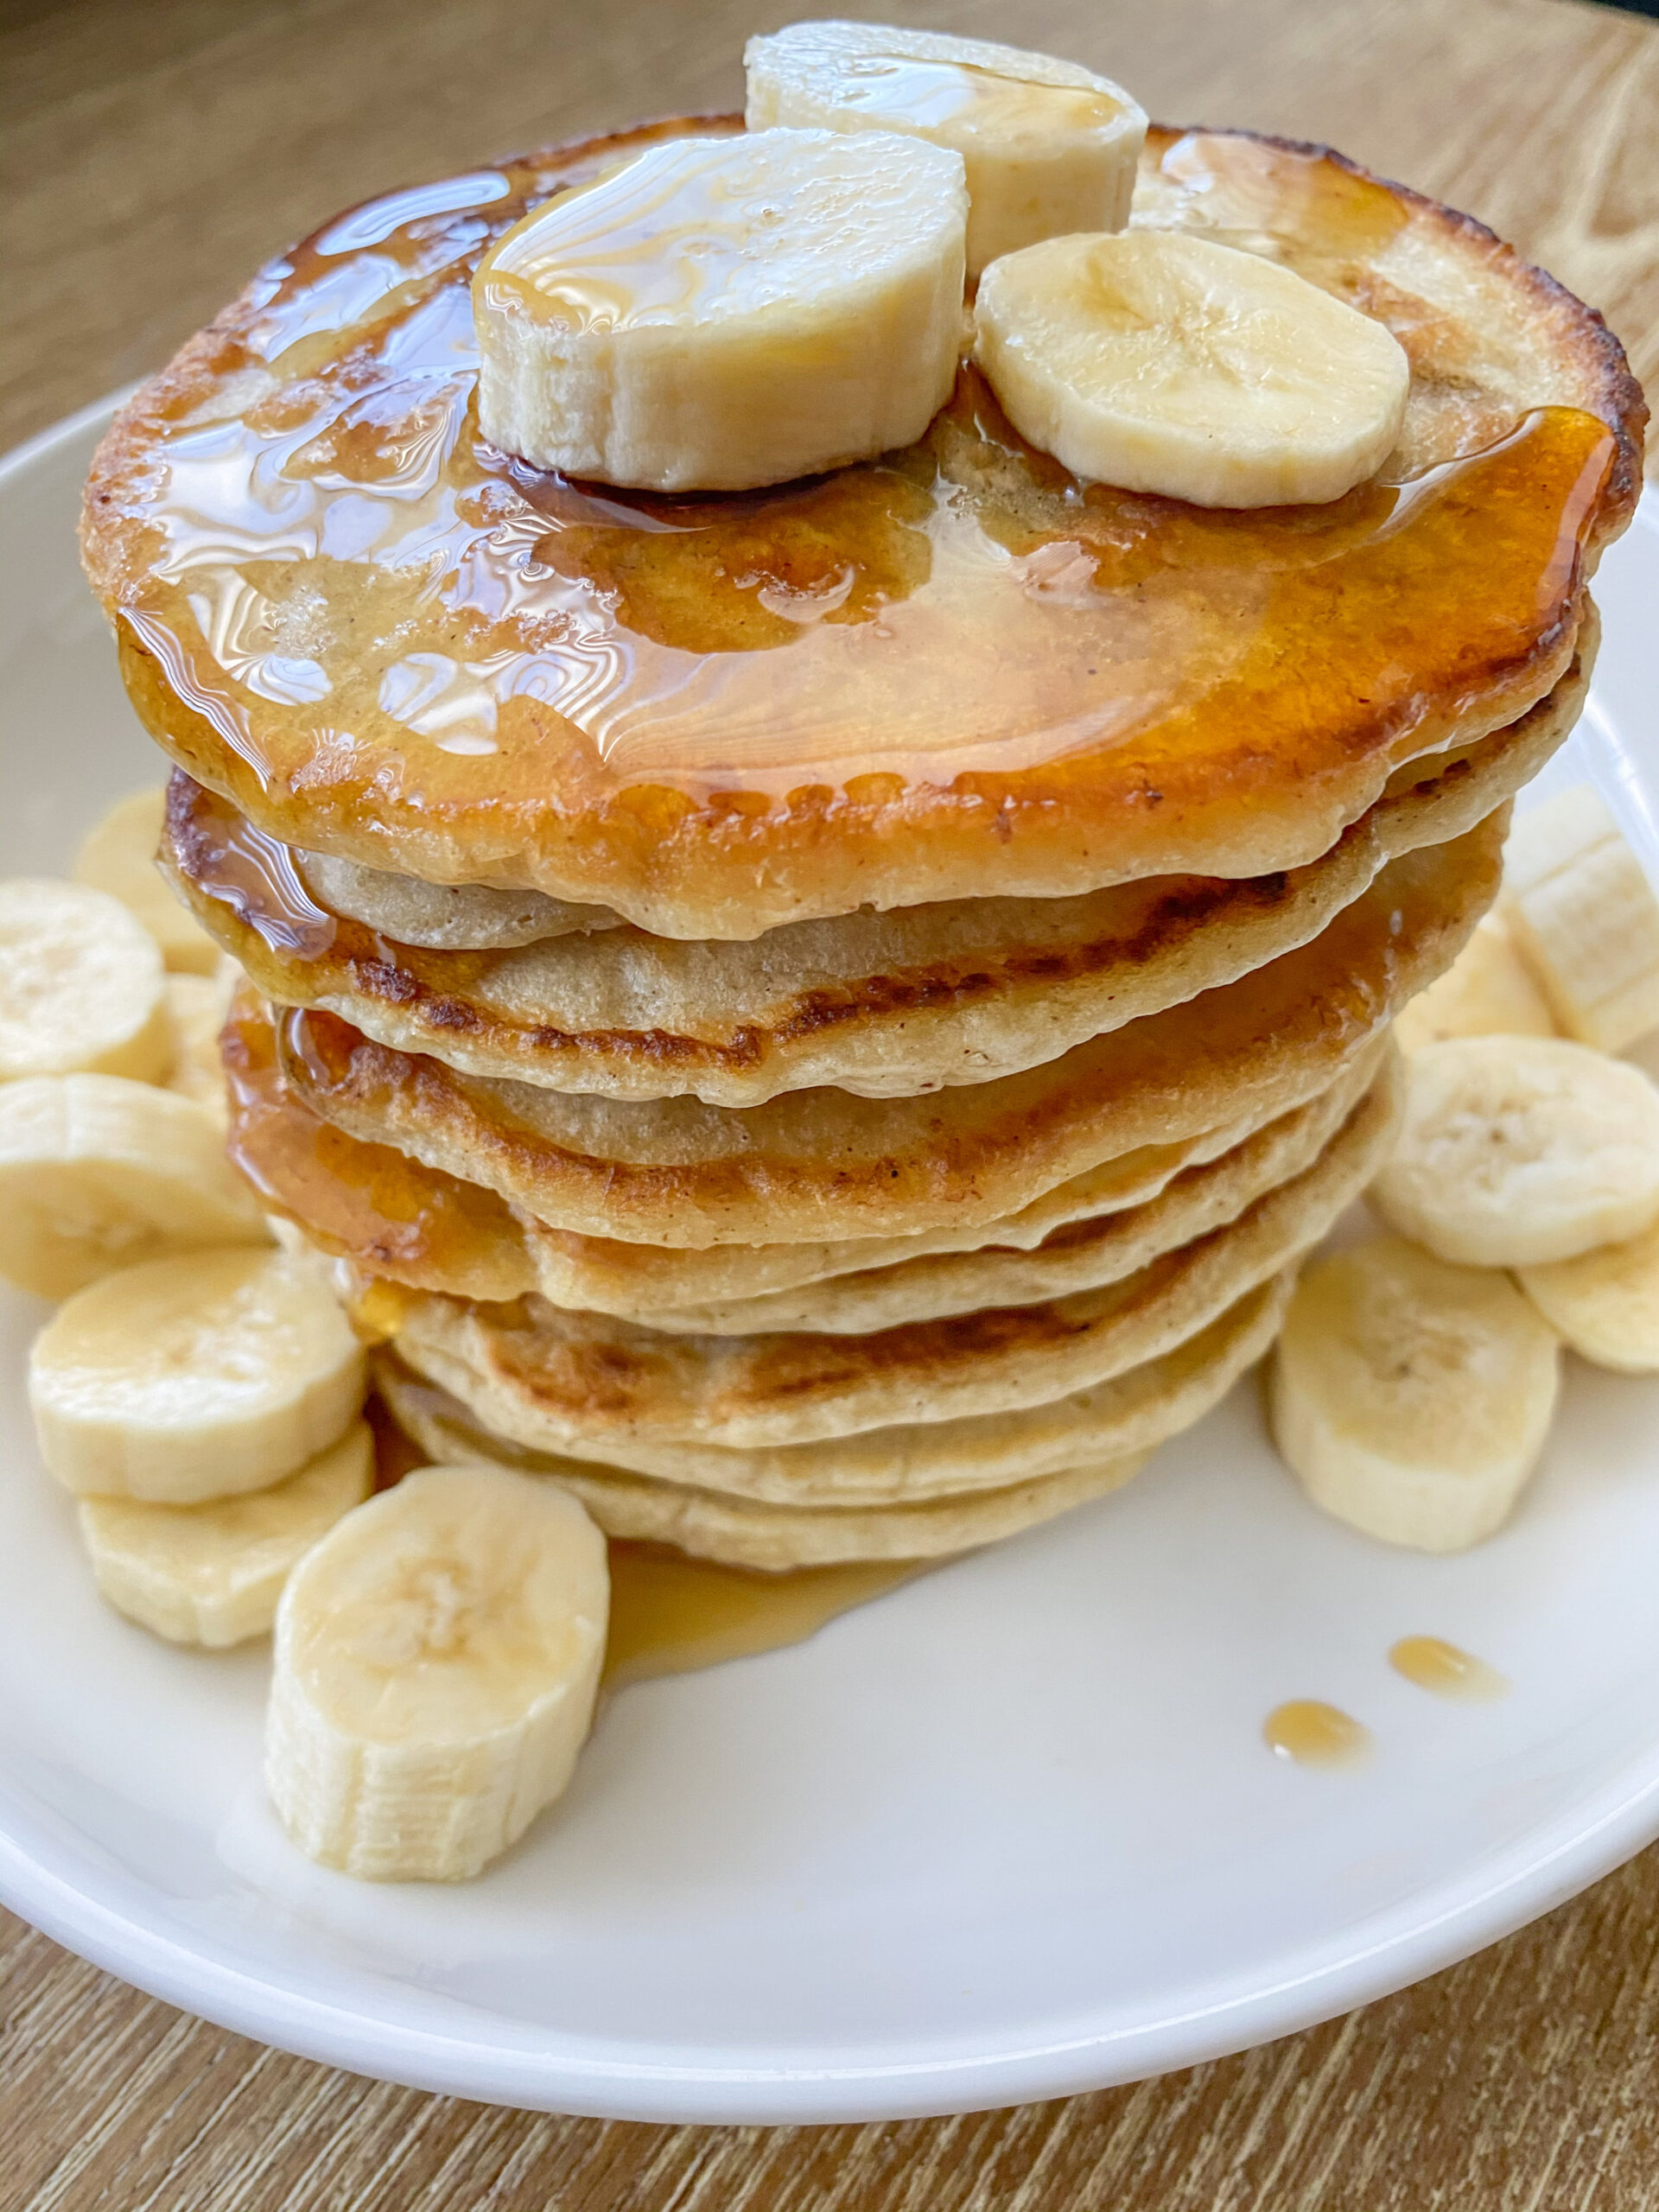 The Best Vegan Banana Pancakes: This banana pancakes recipe will quickly become a regular breakfast in your home. You only need 5 ingredients and about 20 minutes to make. Serve this delicious plant-based stack topped with banana slices and drizzled with maple syrup.

These vegan banana pancakes are so simple and delicious, and can be made gluten-free if needed.